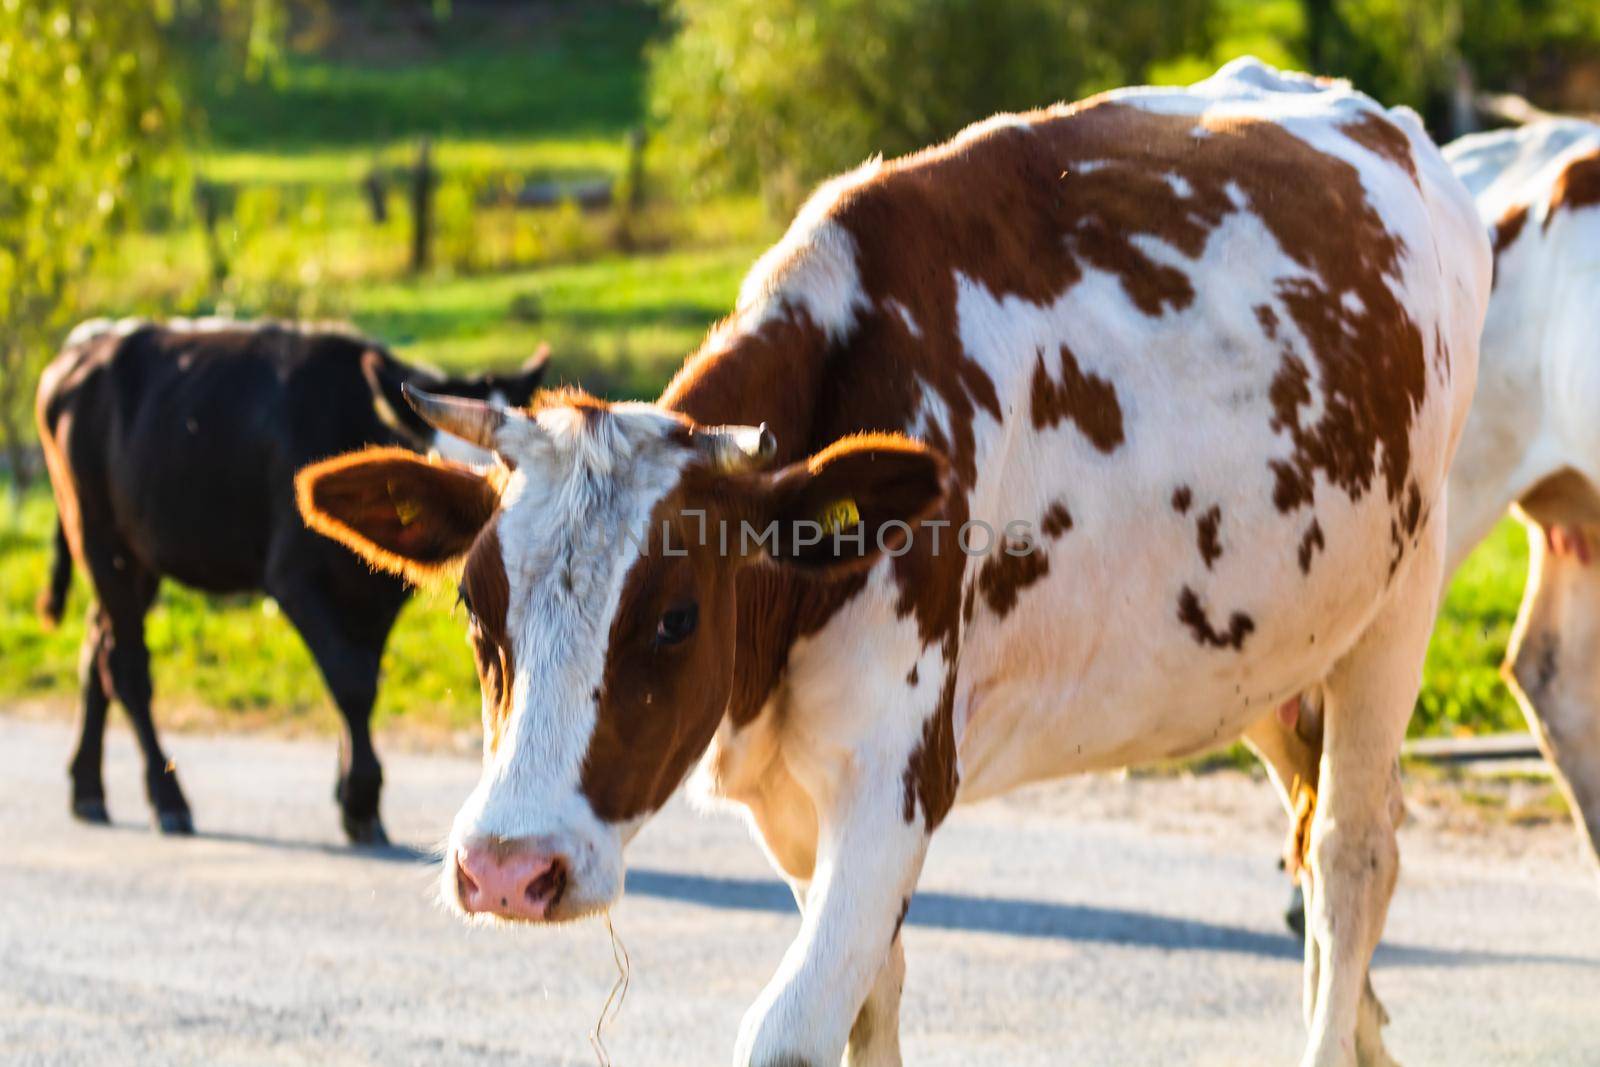 A cattle of cows crossing the street